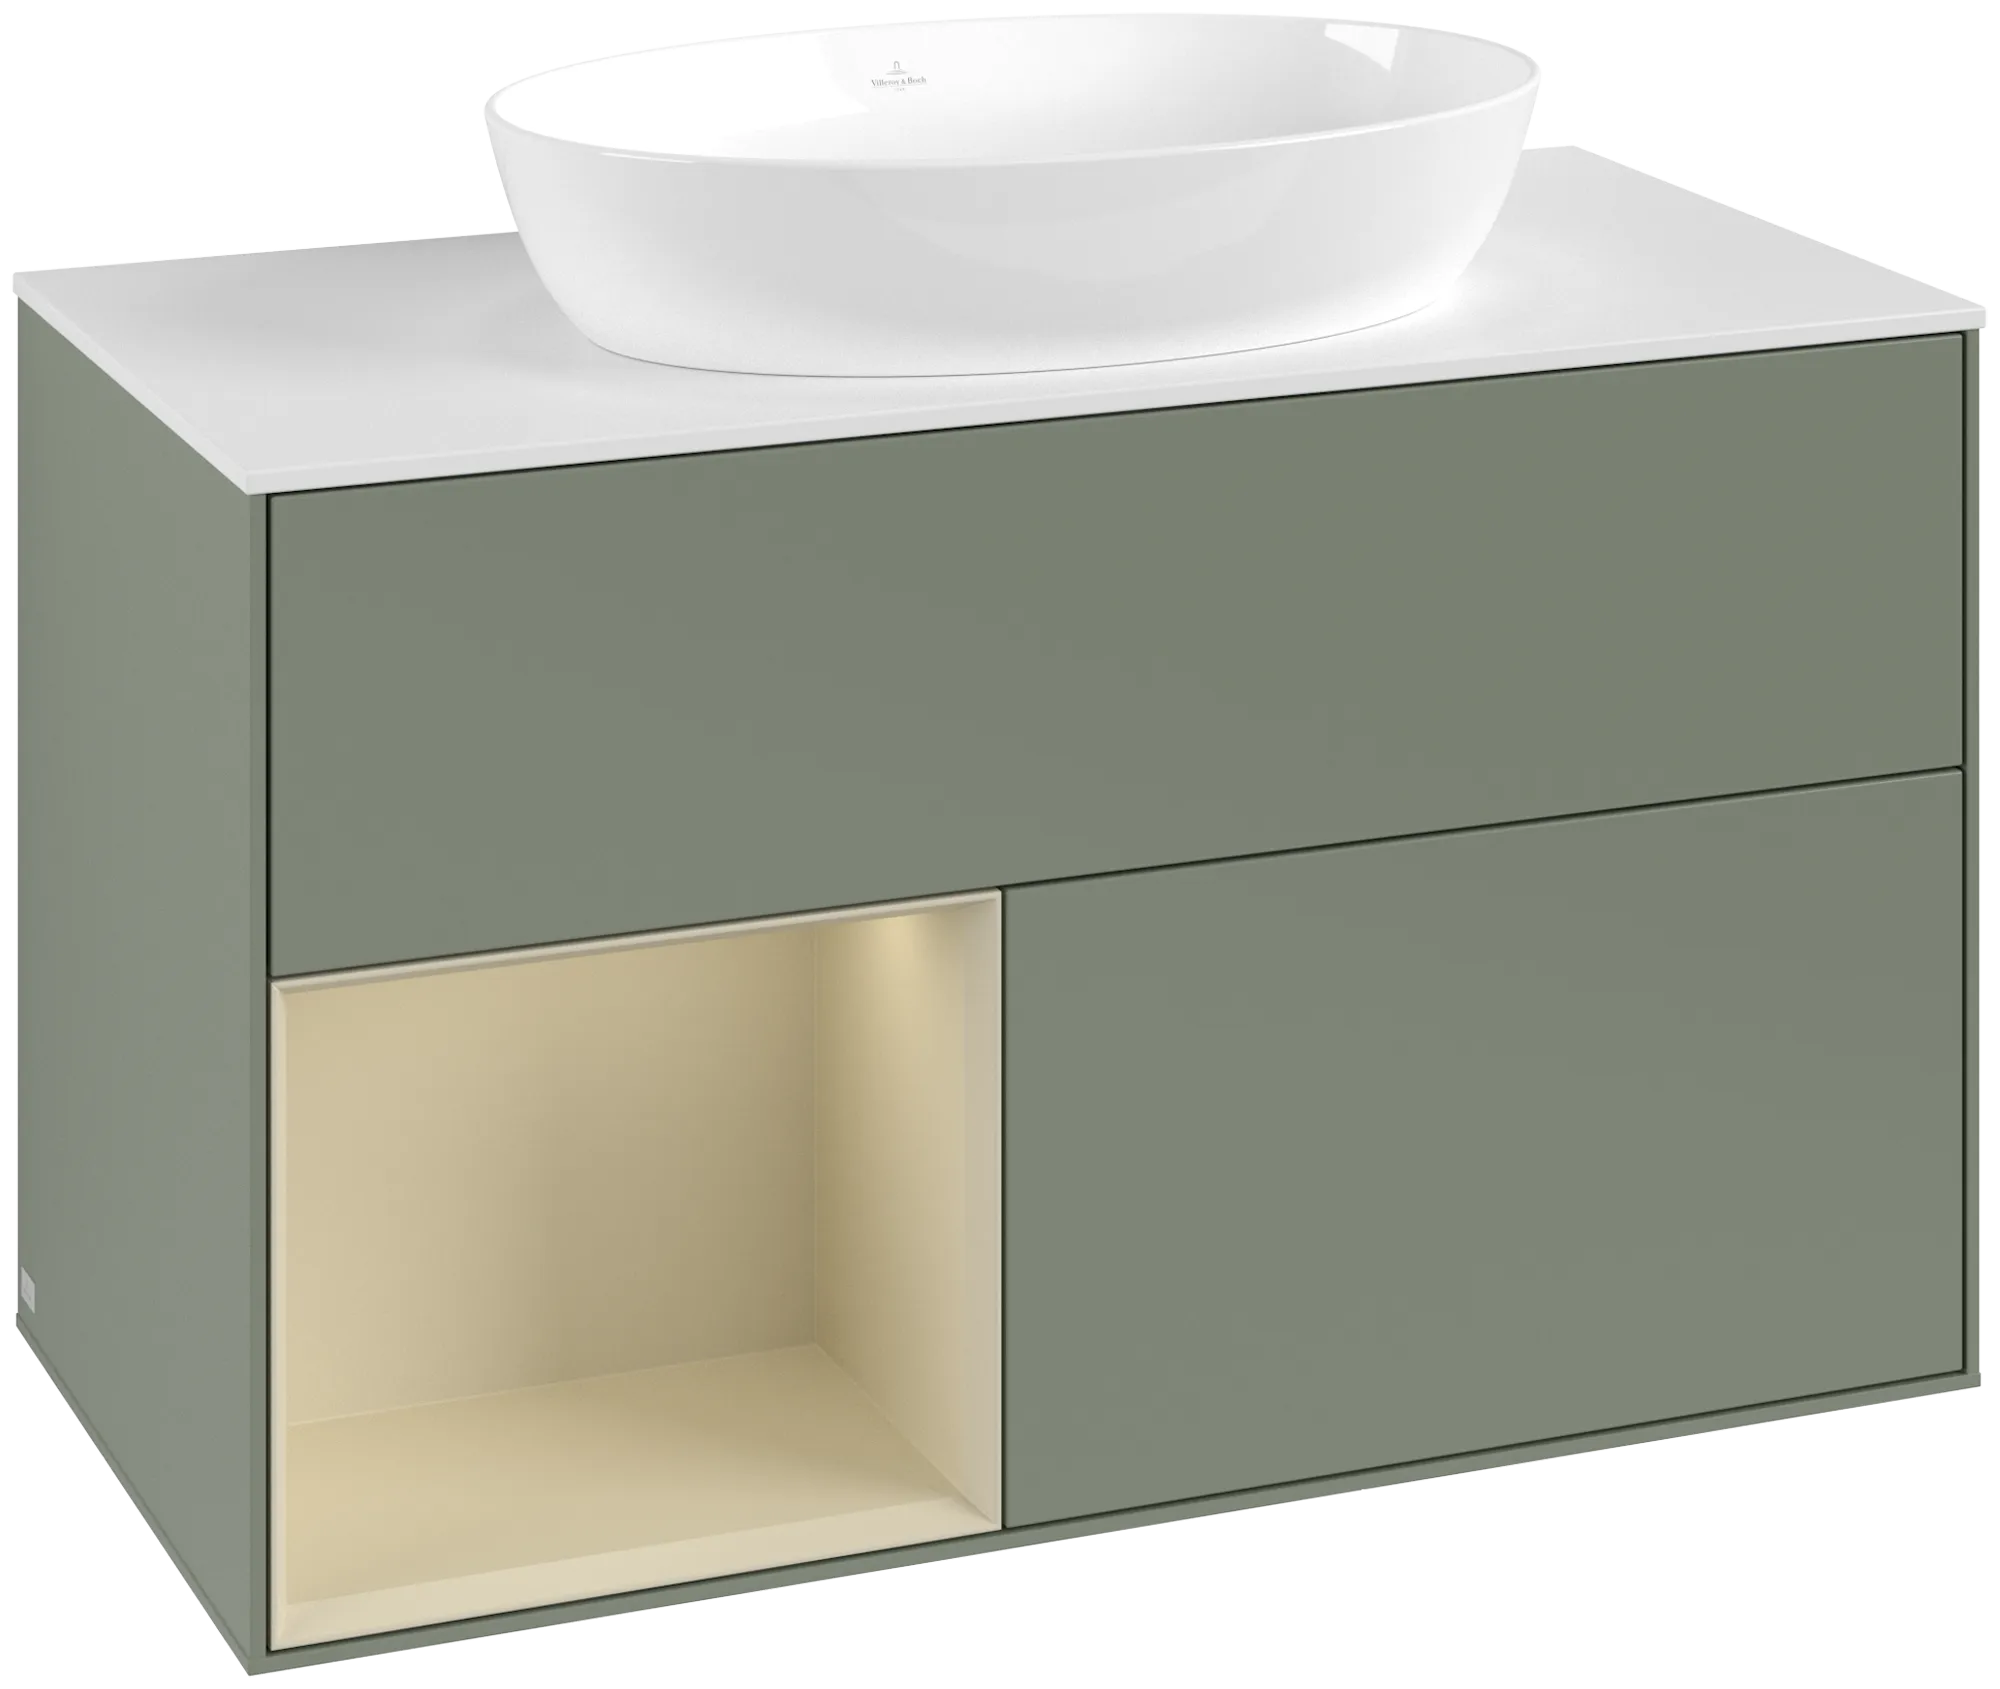 Picture of VILLEROY BOCH Finion Vanity unit, with lighting, 2 pull-out compartments, 1000 x 603 x 501 mm, Olive Matt Lacquer / Silk Grey Matt Lacquer / Glass White Matt #GA11HJGM